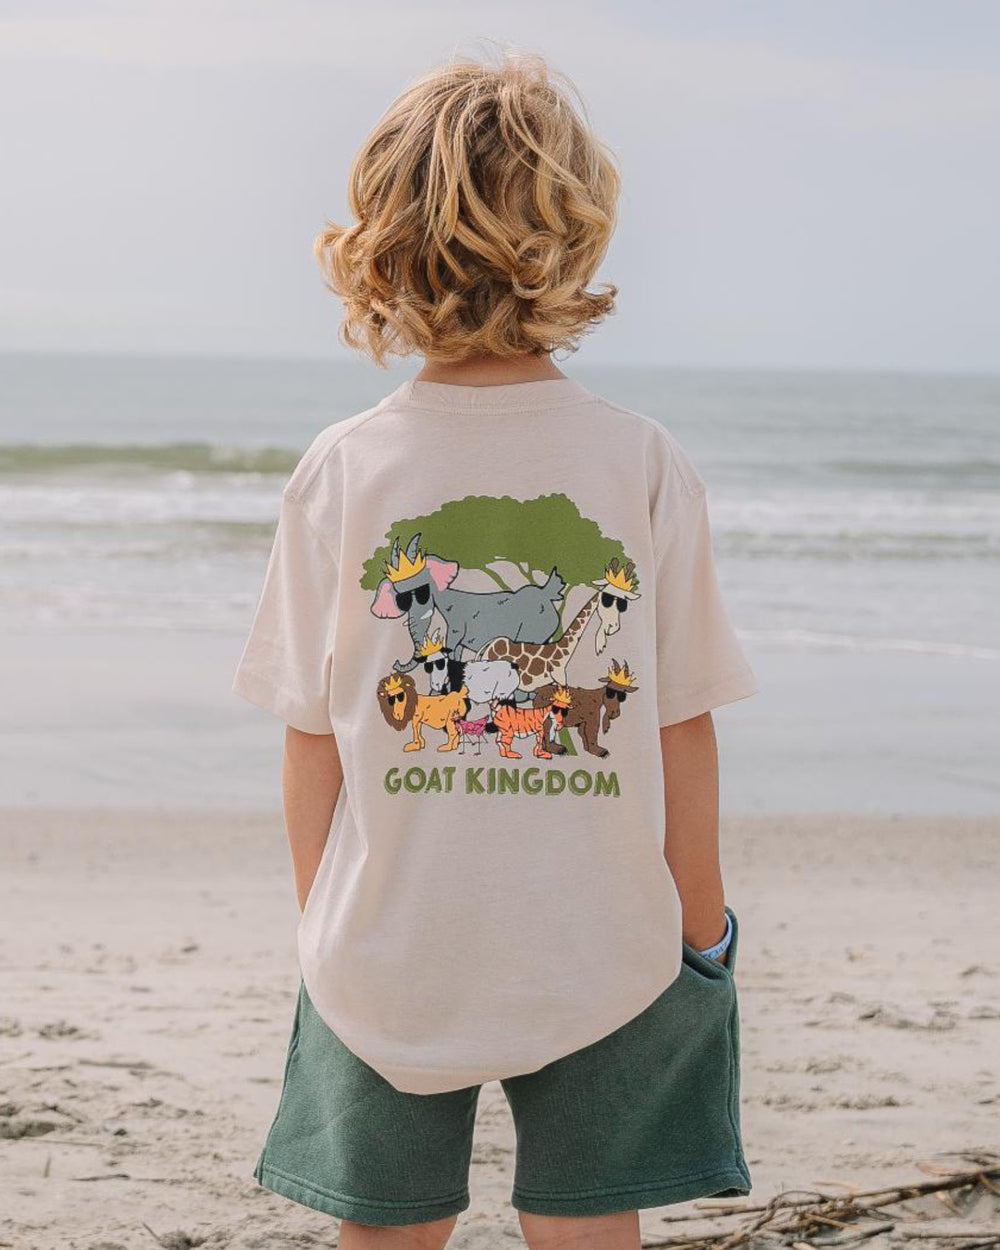 Kid on the beach looking at the ocean with hands in his pockets